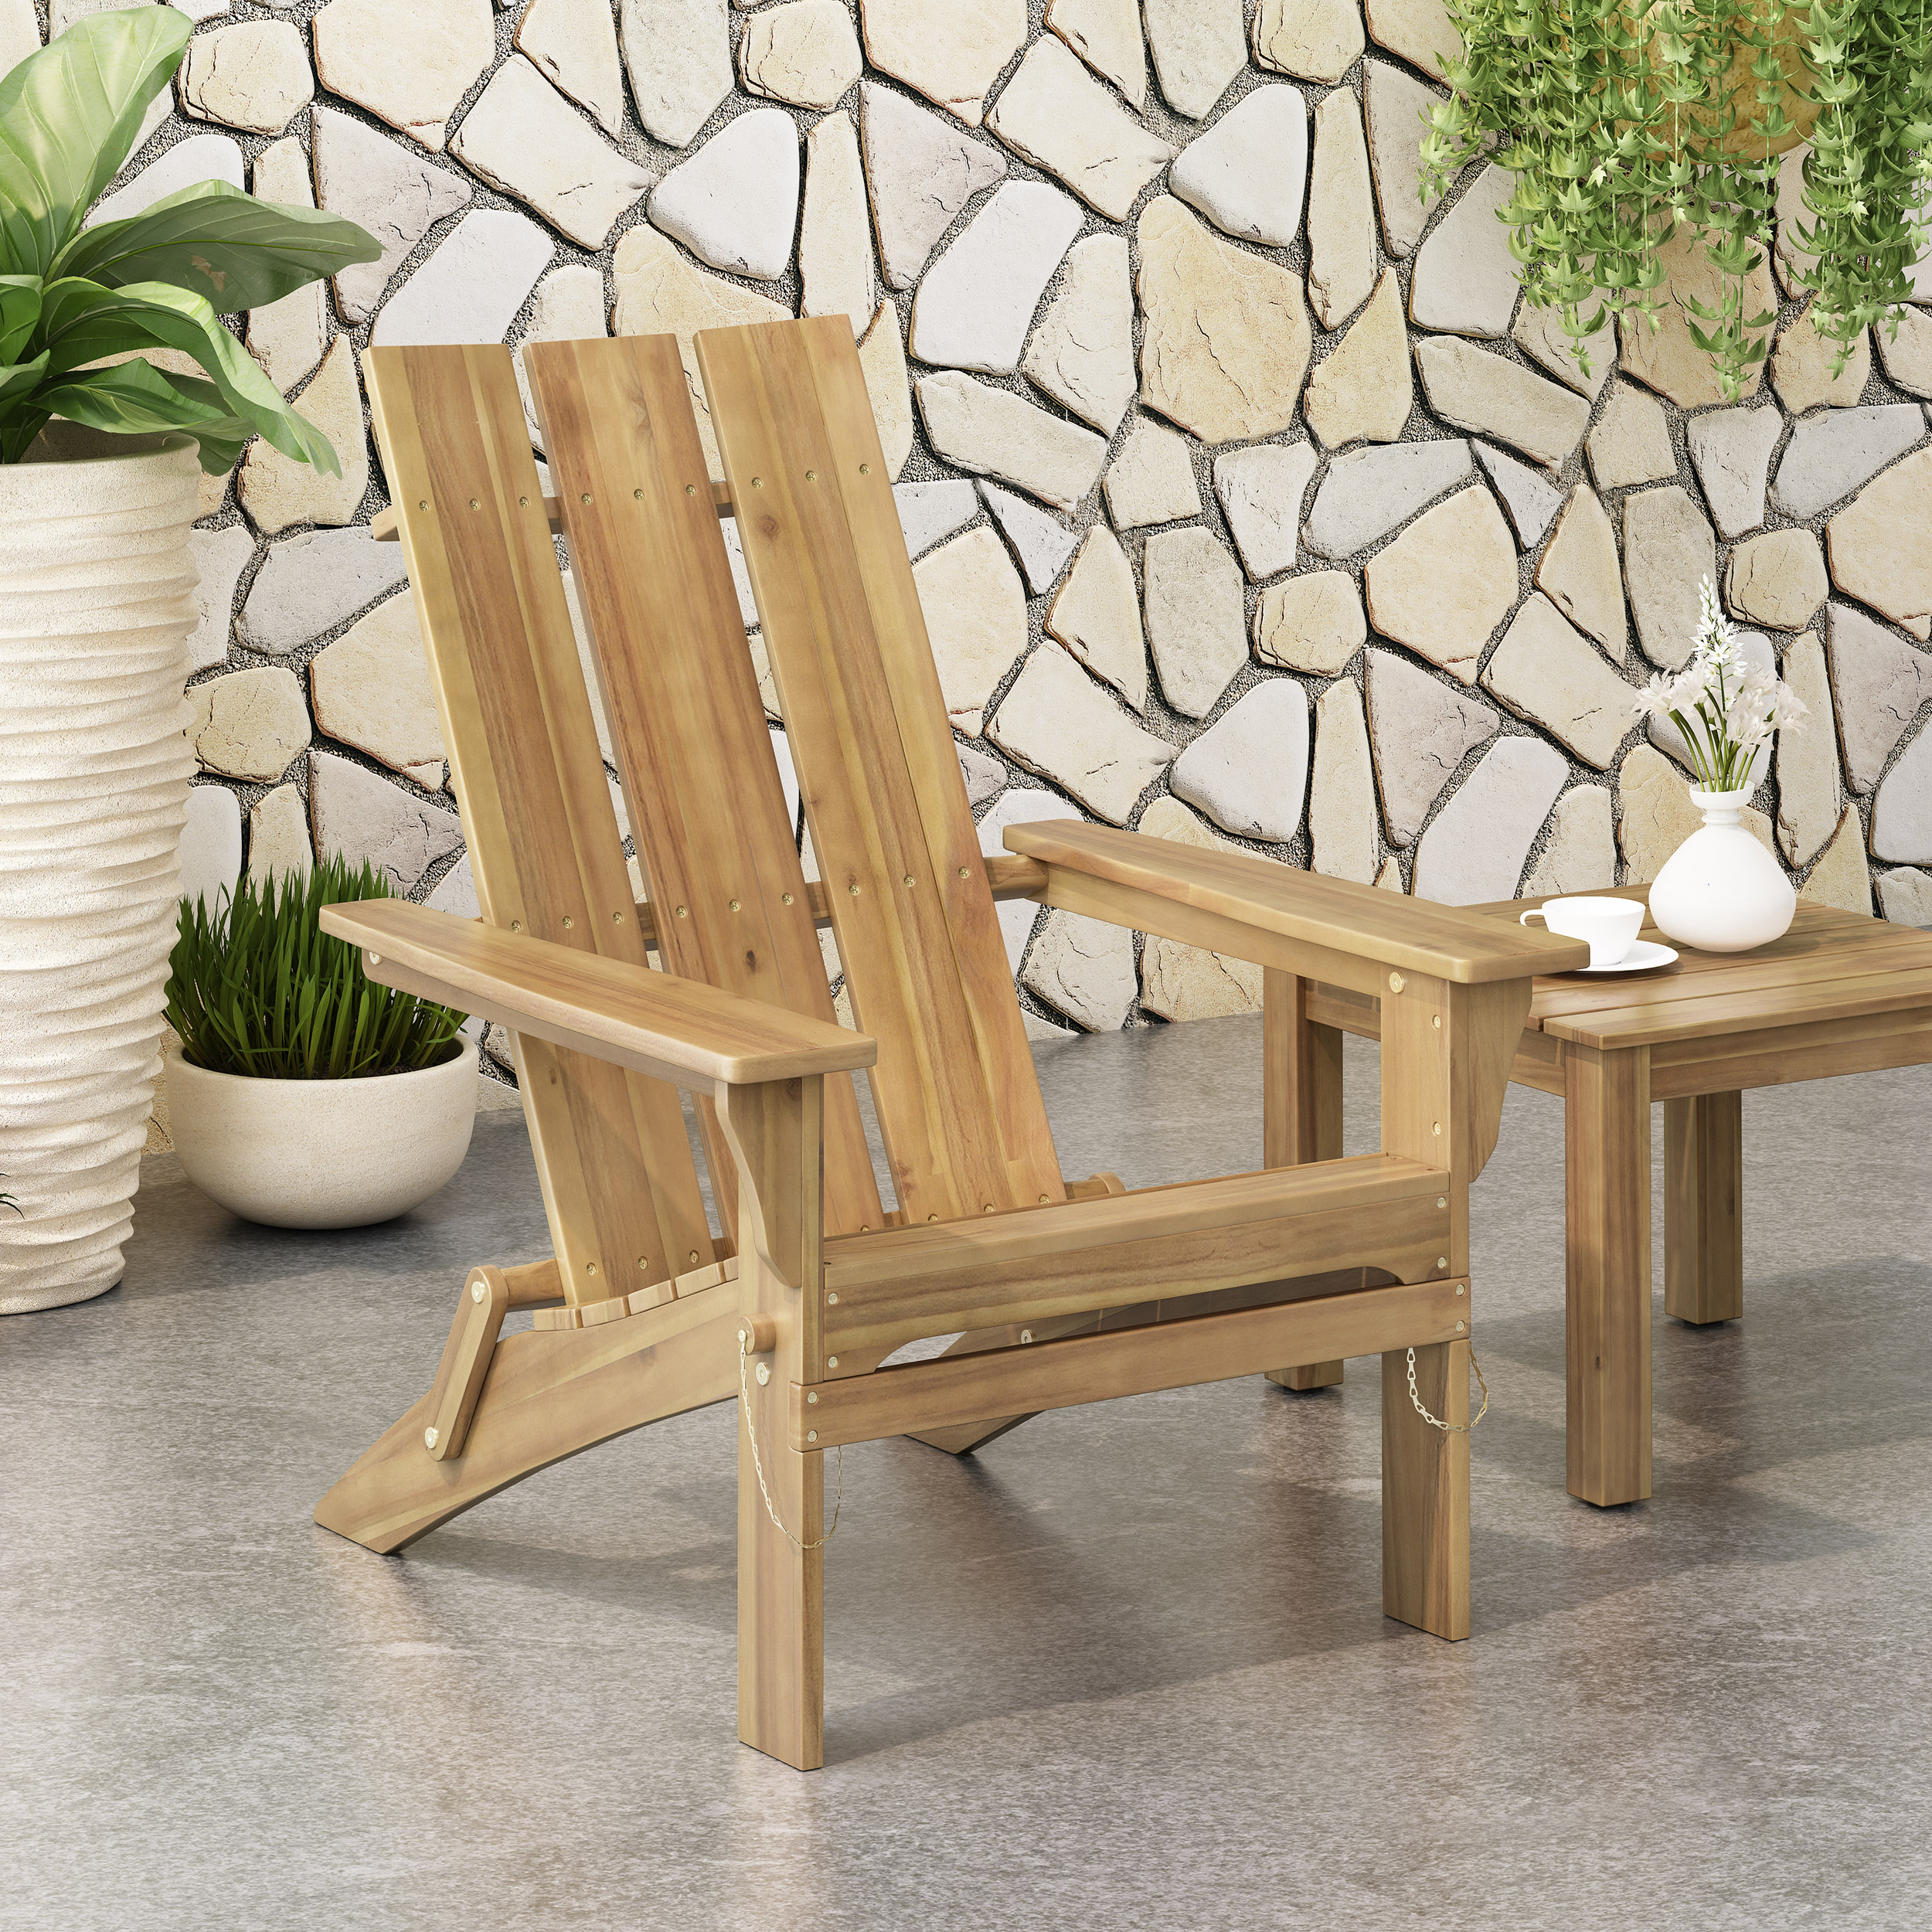 Outdoor Classic Natural Color Solid Wood Adirondack Chair Garden Lounge Chair - image 2 of 5